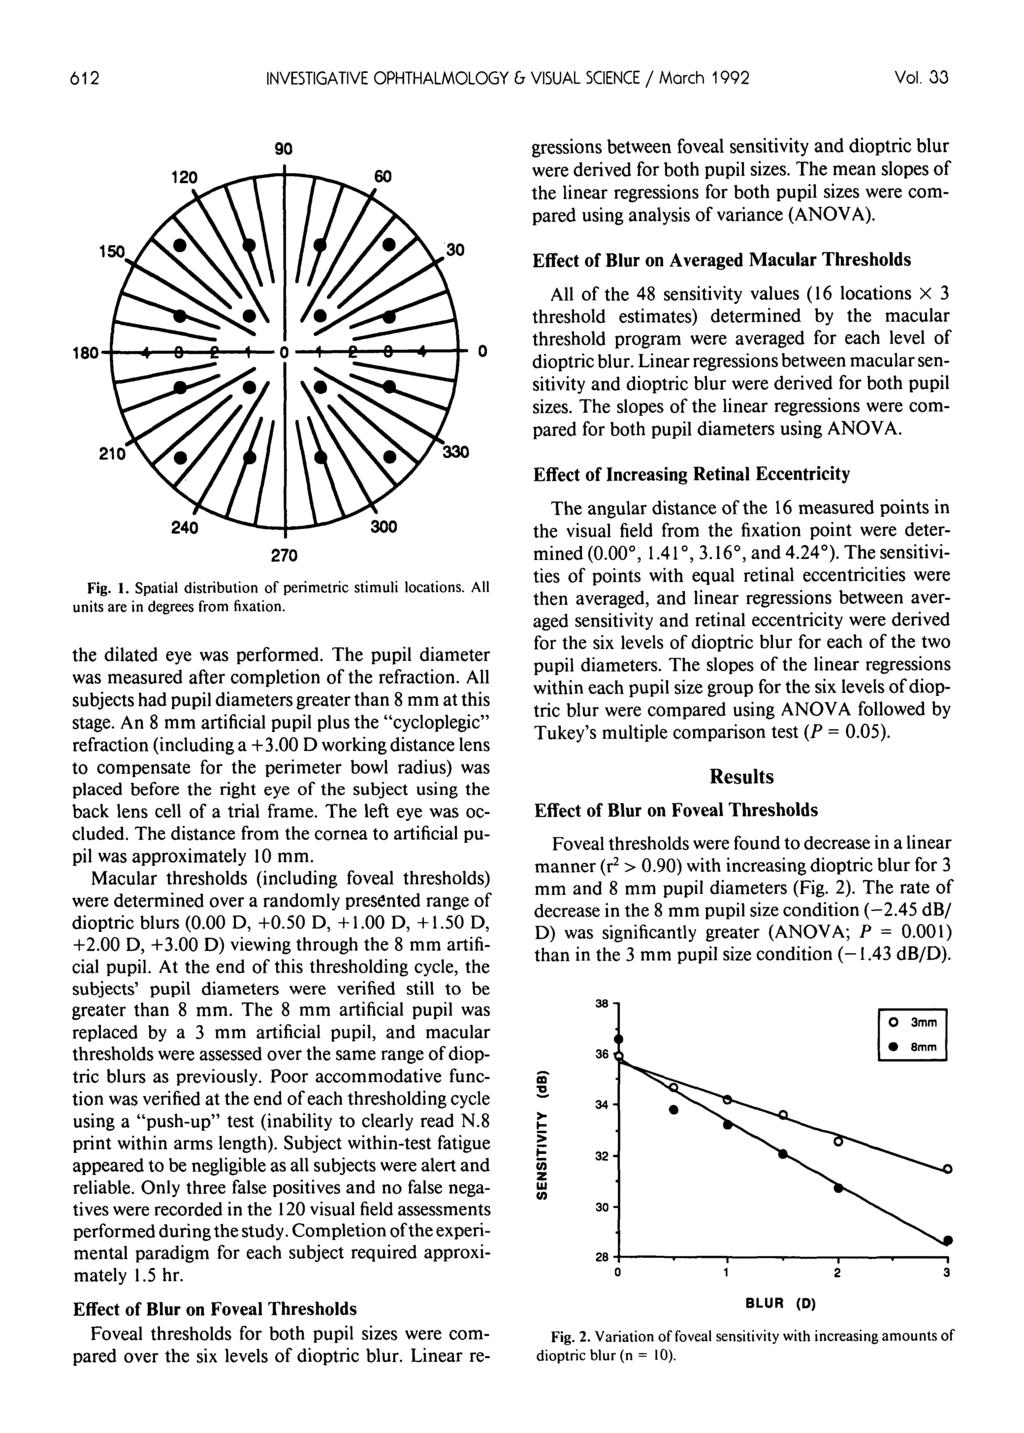 612 INVESTIGATIVE OPHTHALMOLOGY & VISUAL SCIENCE / March 1992 Vol. 33 180 120 60 30 210 330 240 300 270 Fig. 1. Spatial distribution of peri metric stimuli locations.